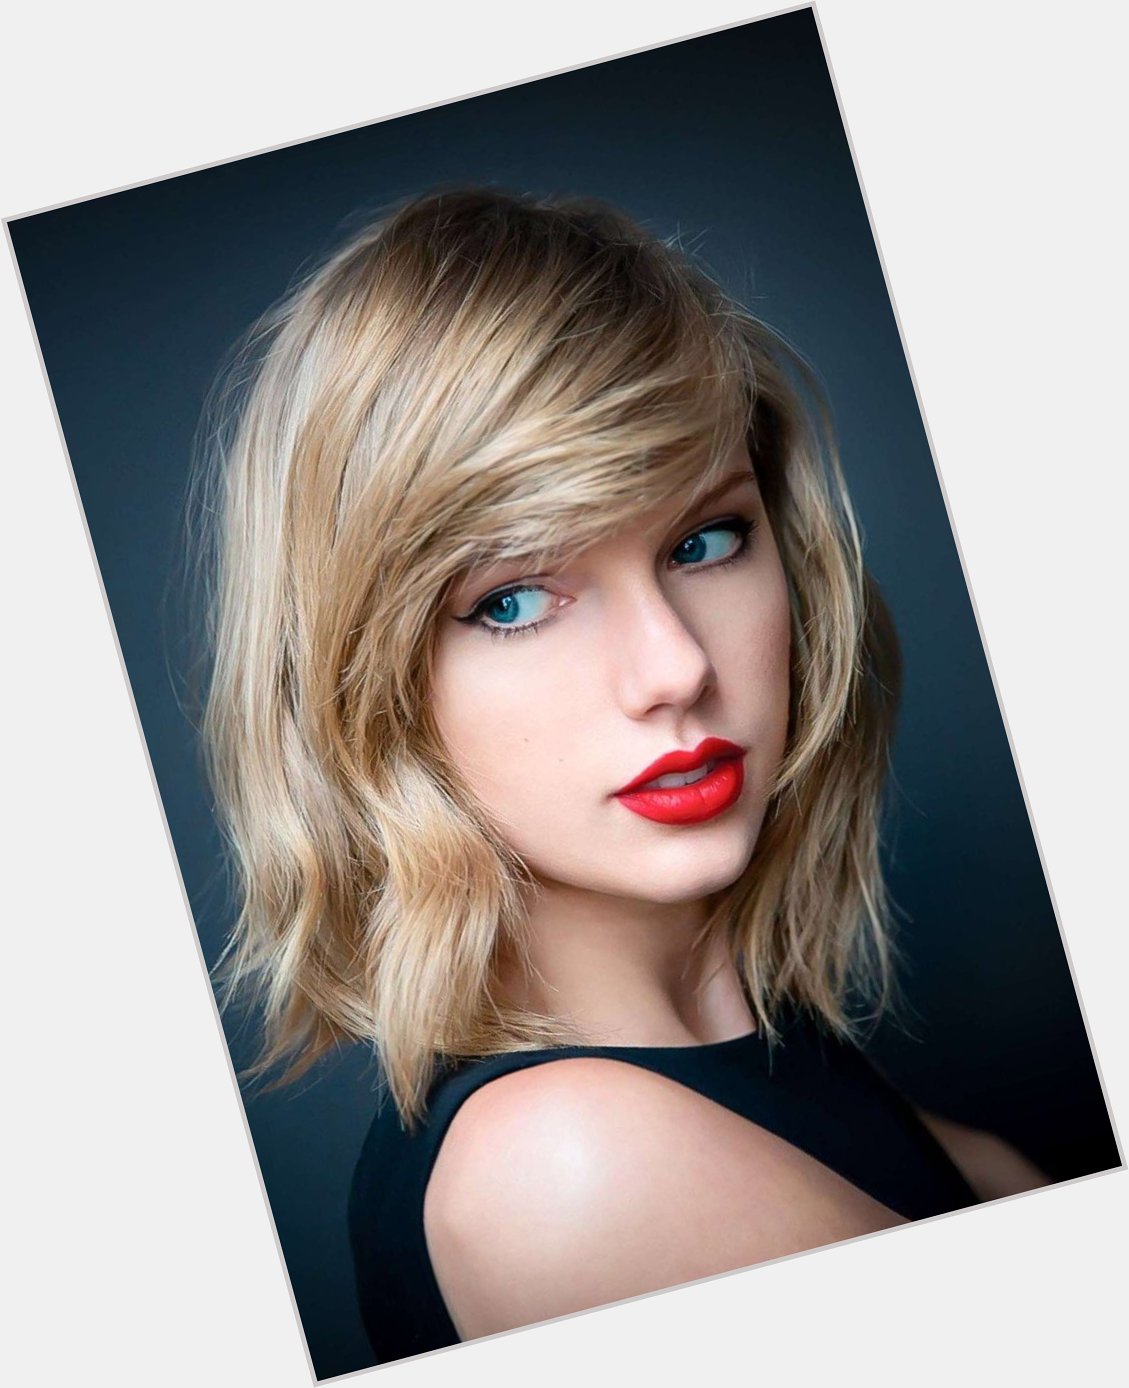 Happy Birthday to  Singer - Taylor Swift Who is 32yo today!
(2014) 